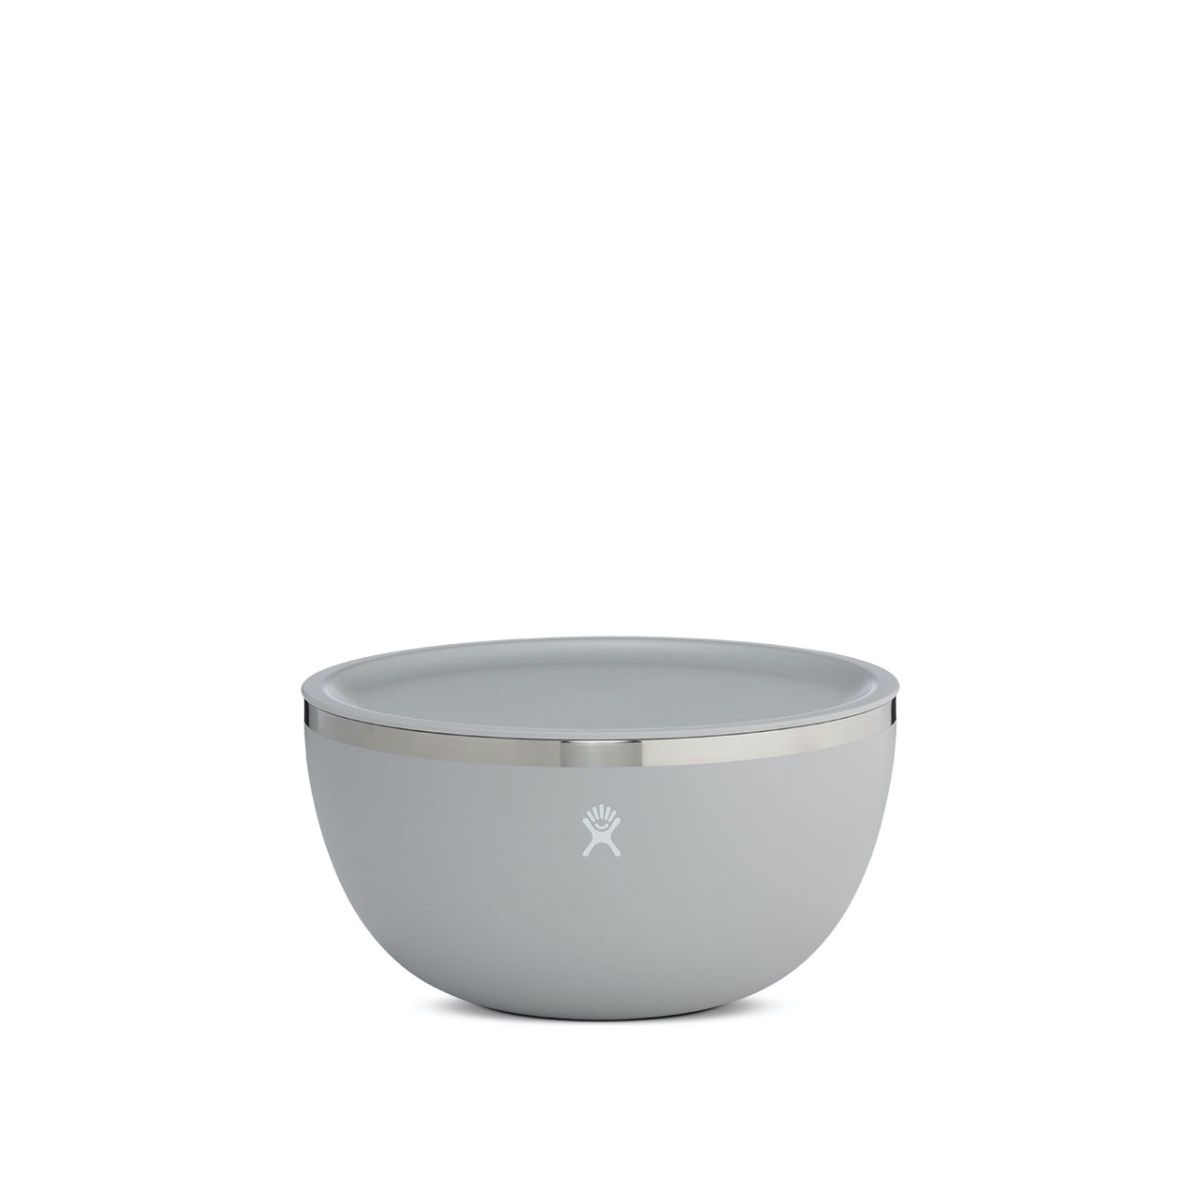 Hydro Flask / 3 qt Serving Bowl with Lid